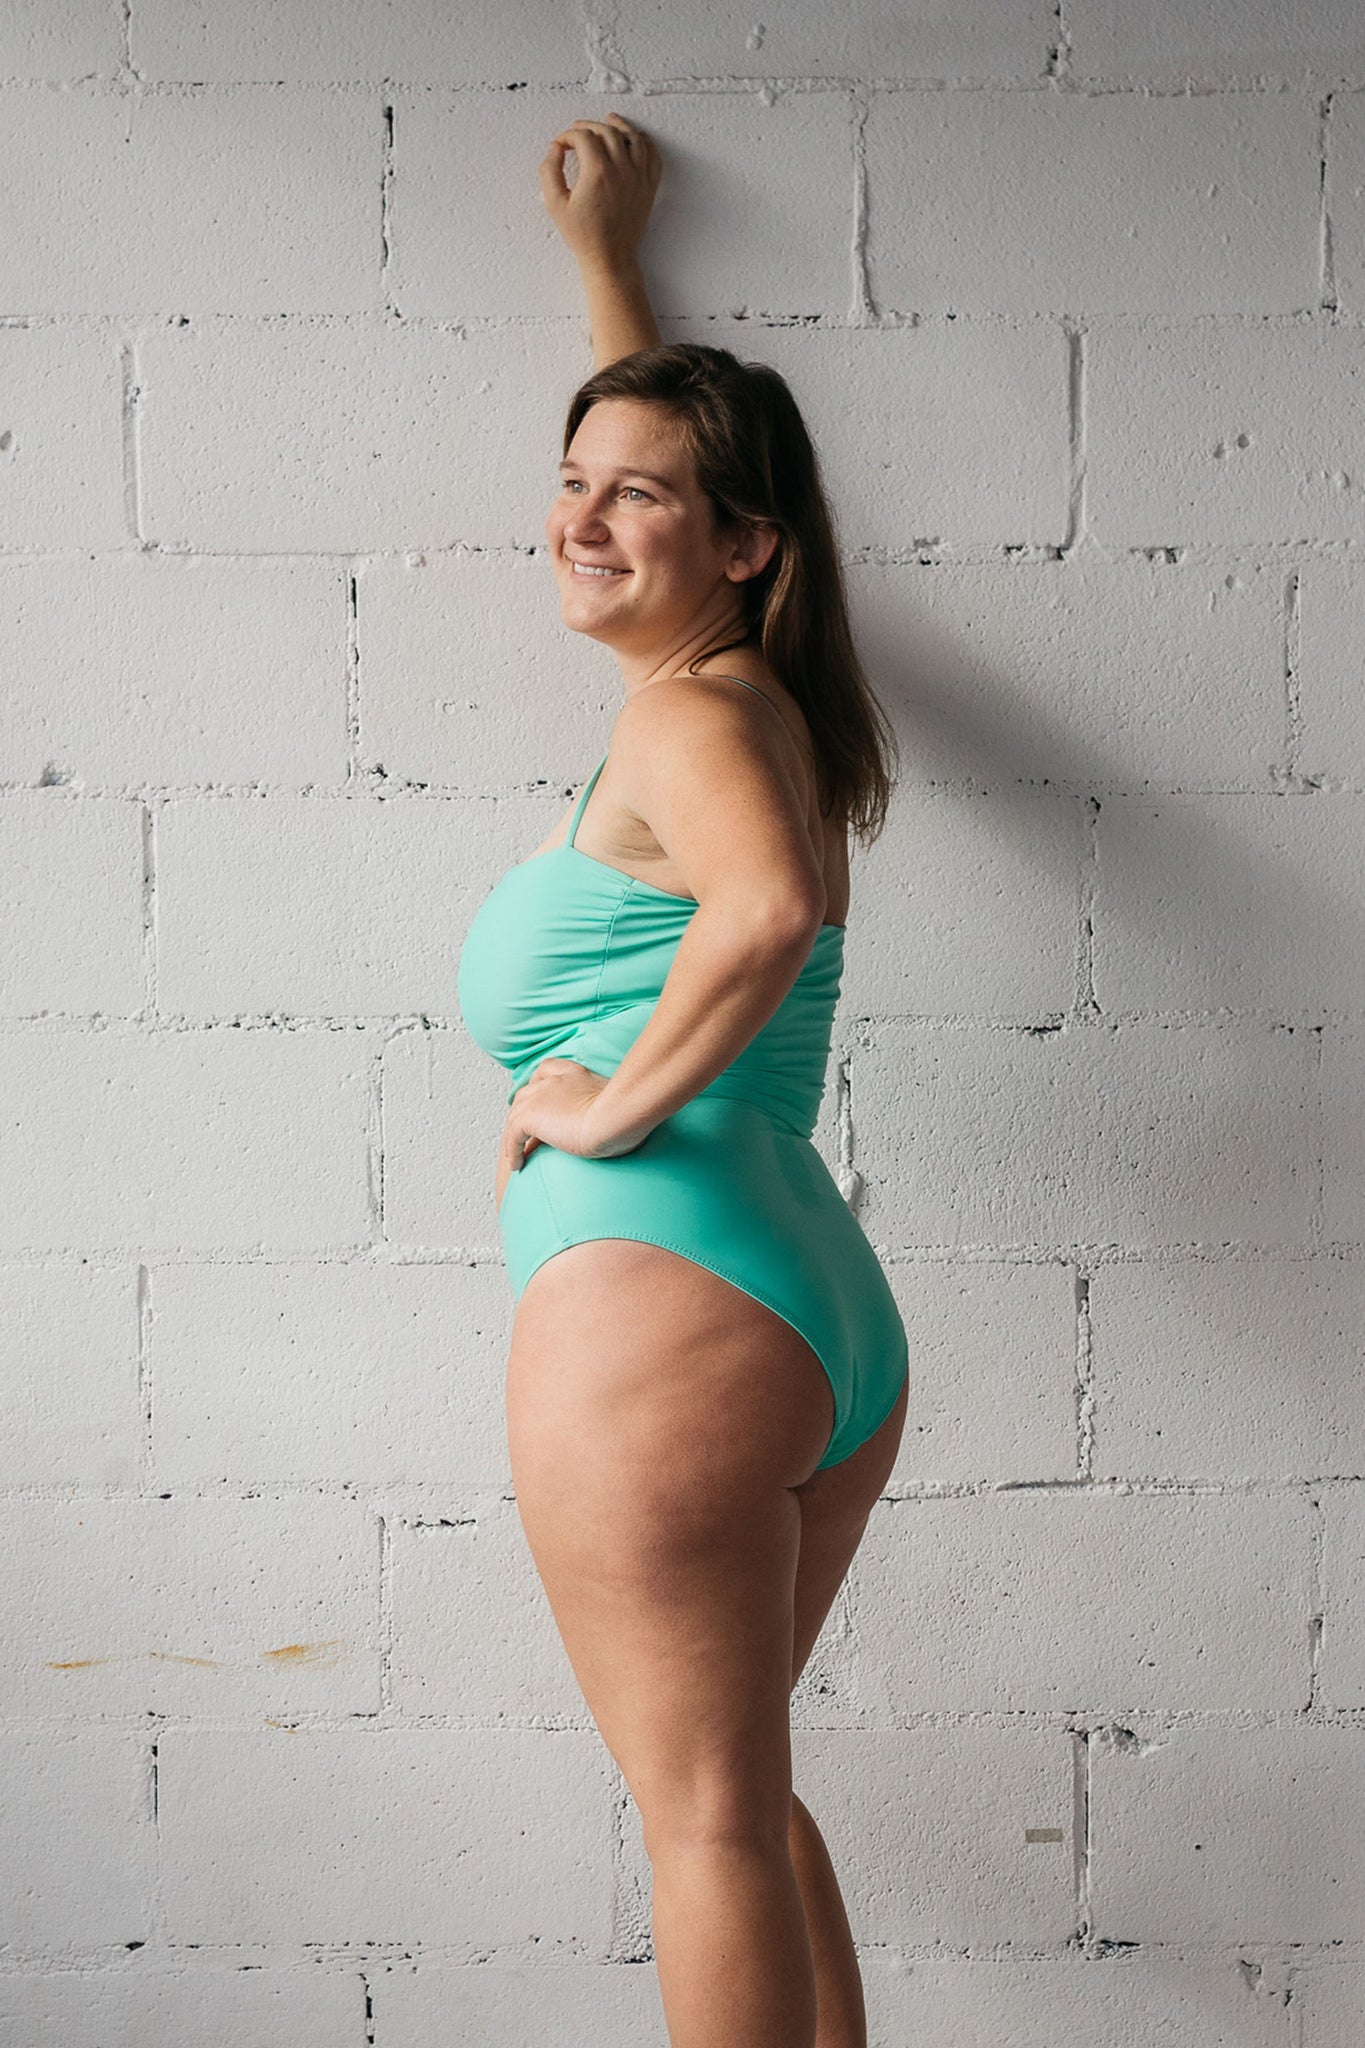 A woman standing with one hand against a white wall wearing turquoise high waisted bikini bottoms and a matching turquoise tankini top.